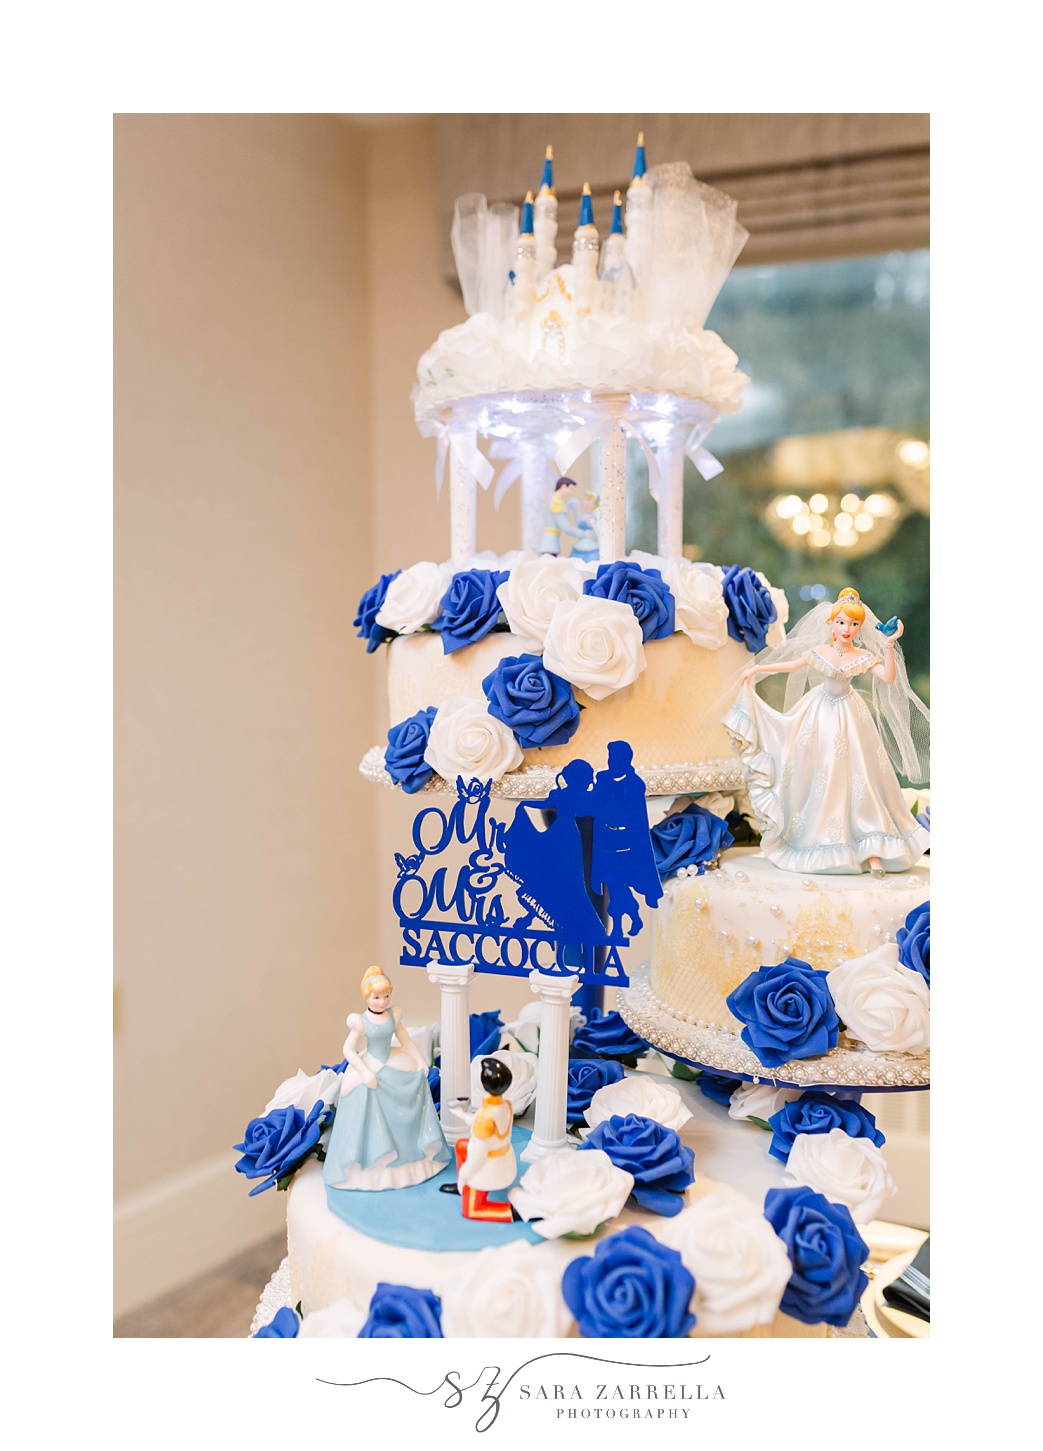 tiered wedding cake with blue and white icing